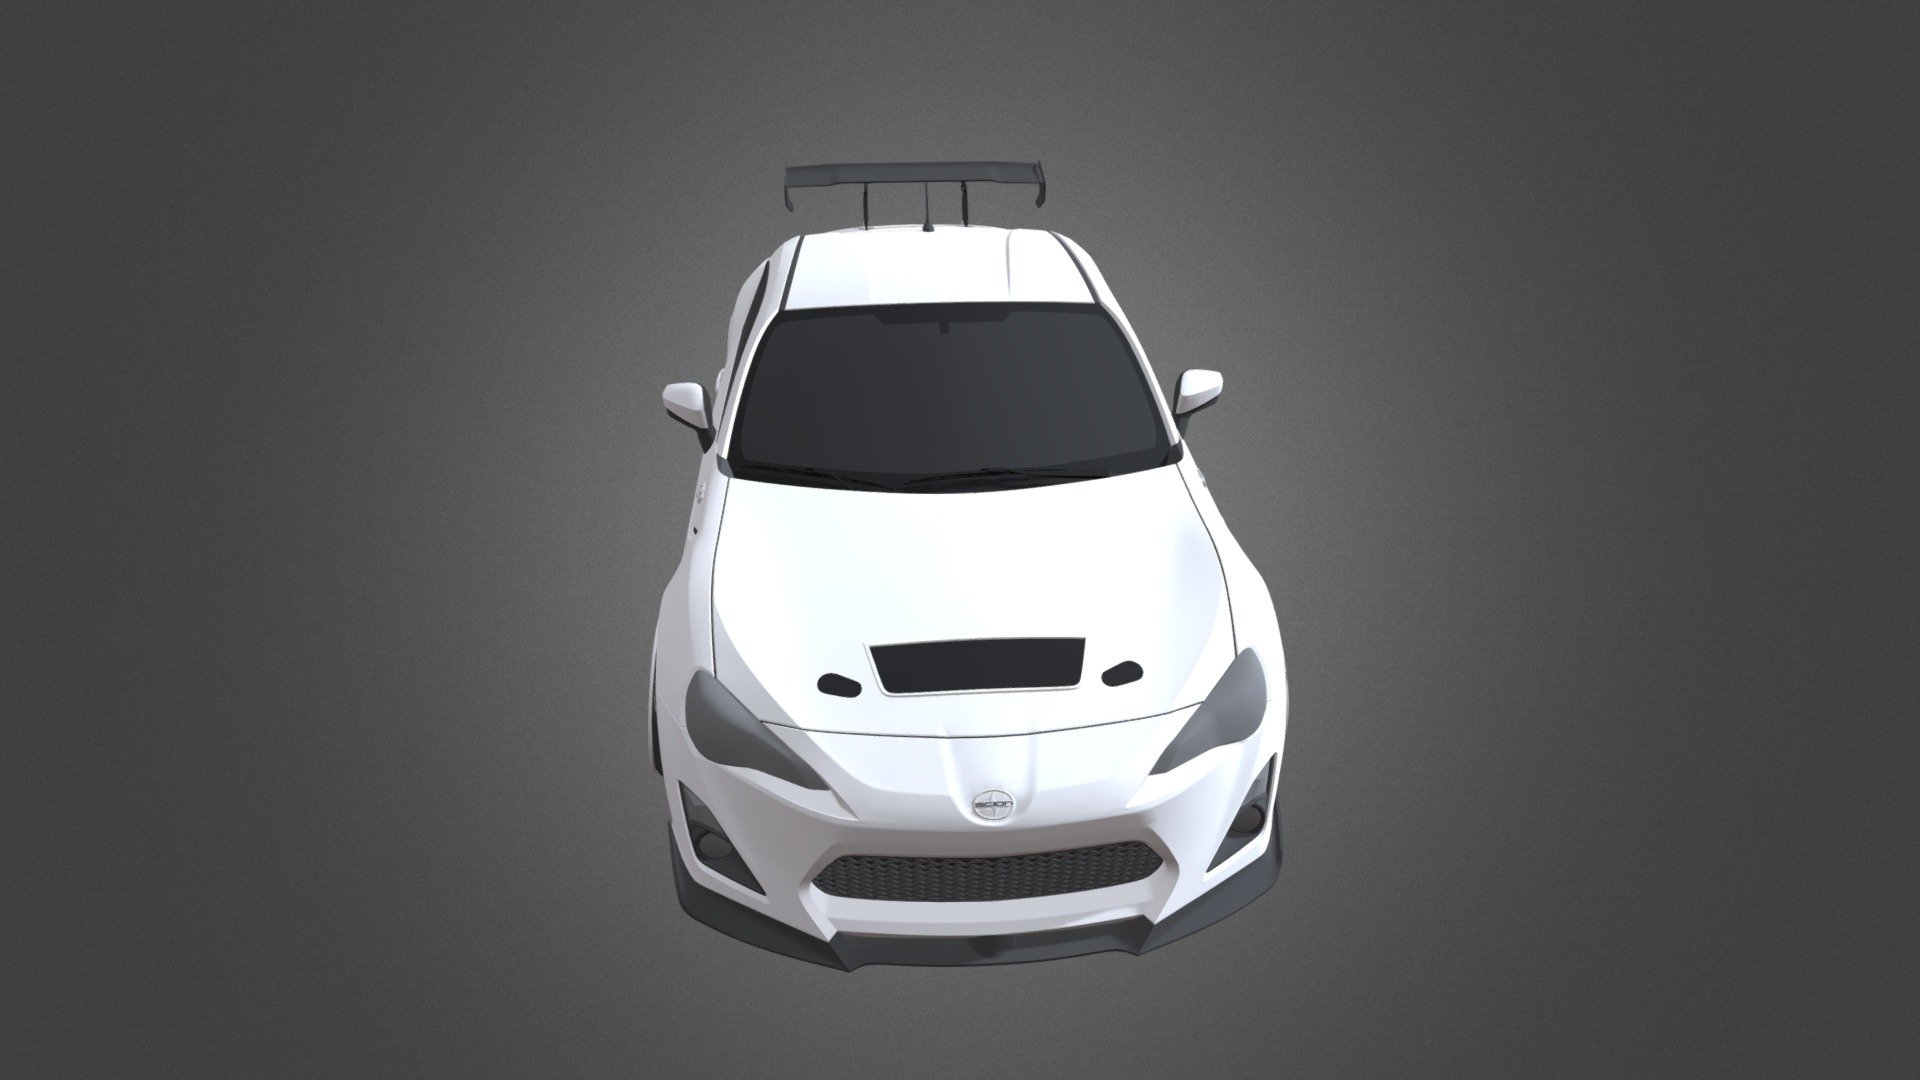 Hd 3d car
can use in game - Car - Download Free 3D model by Tech developers (@Deepu.Dra) 3d model